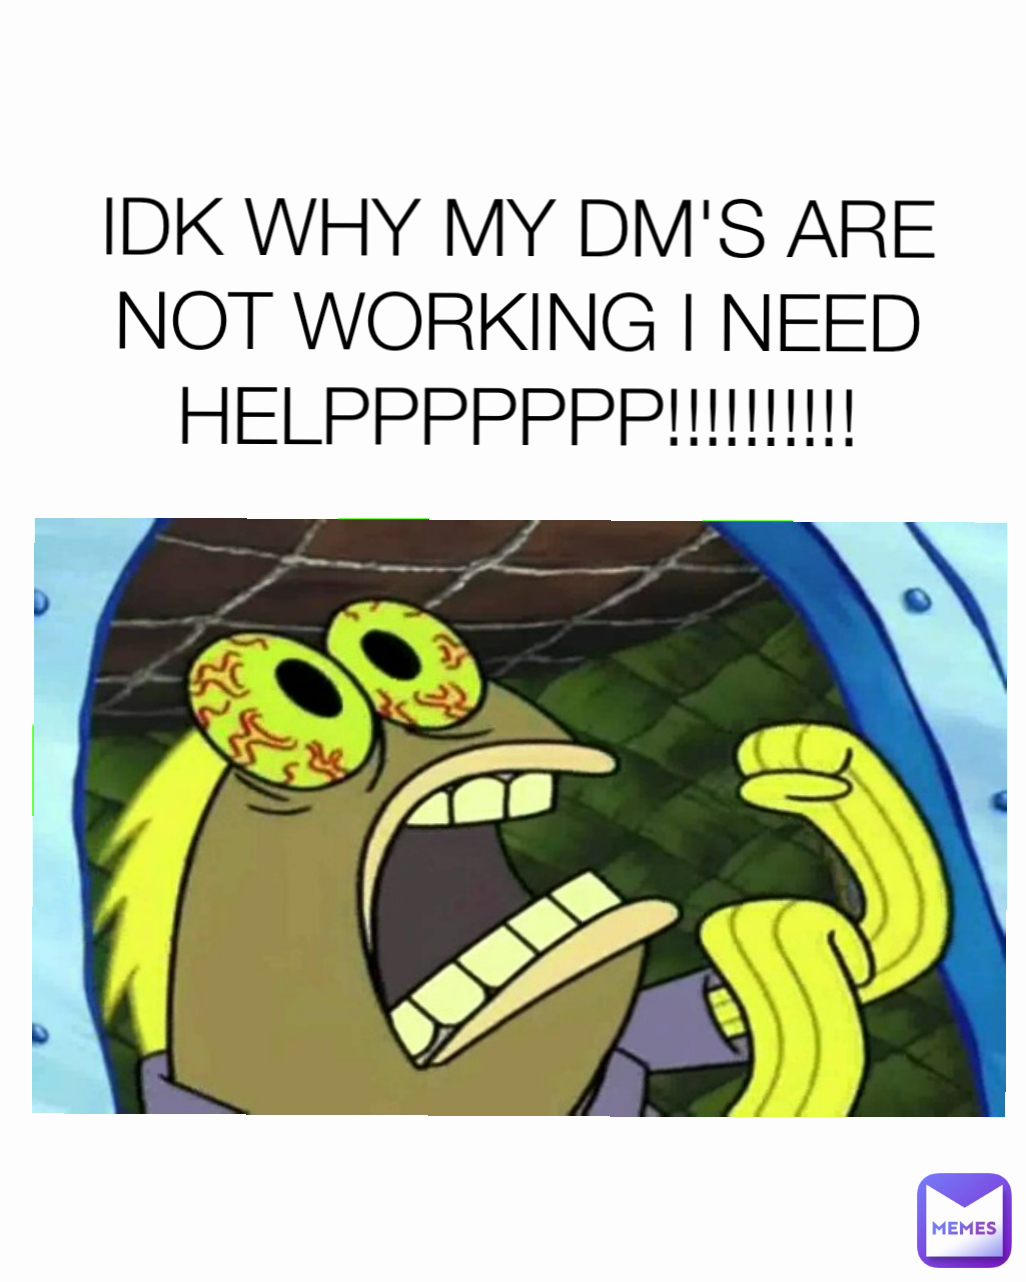 IDK WHY MY DM'S ARE NOT WORKING I NEED HELPPPPPPP!!!!!!!!!!